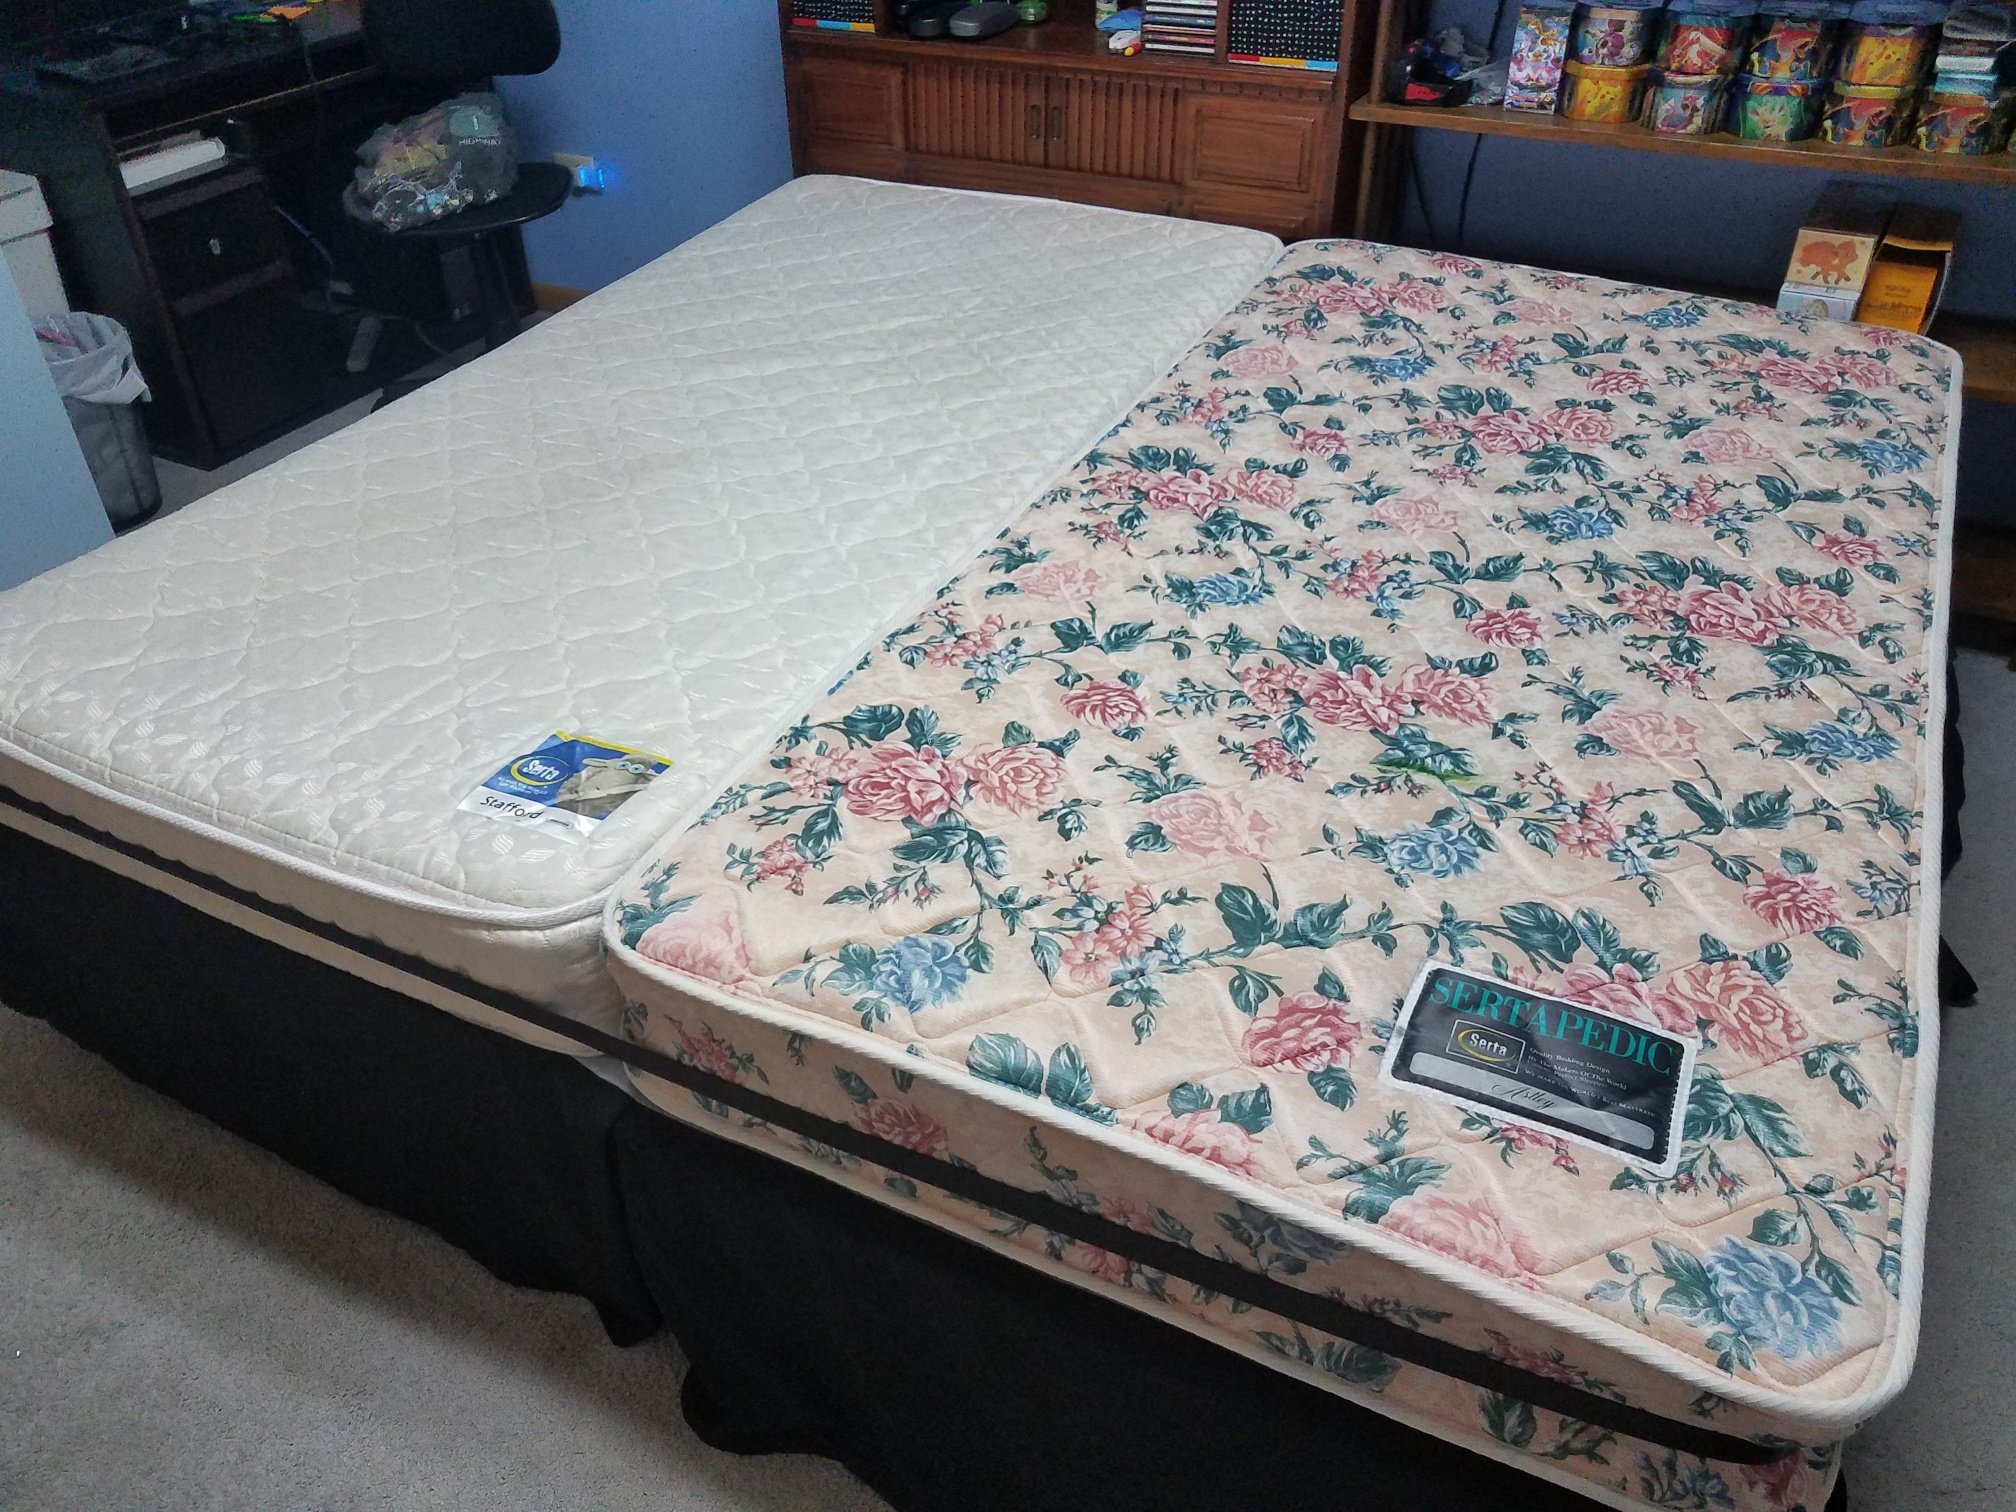 Two Twin beds to a King: Upgrading our son